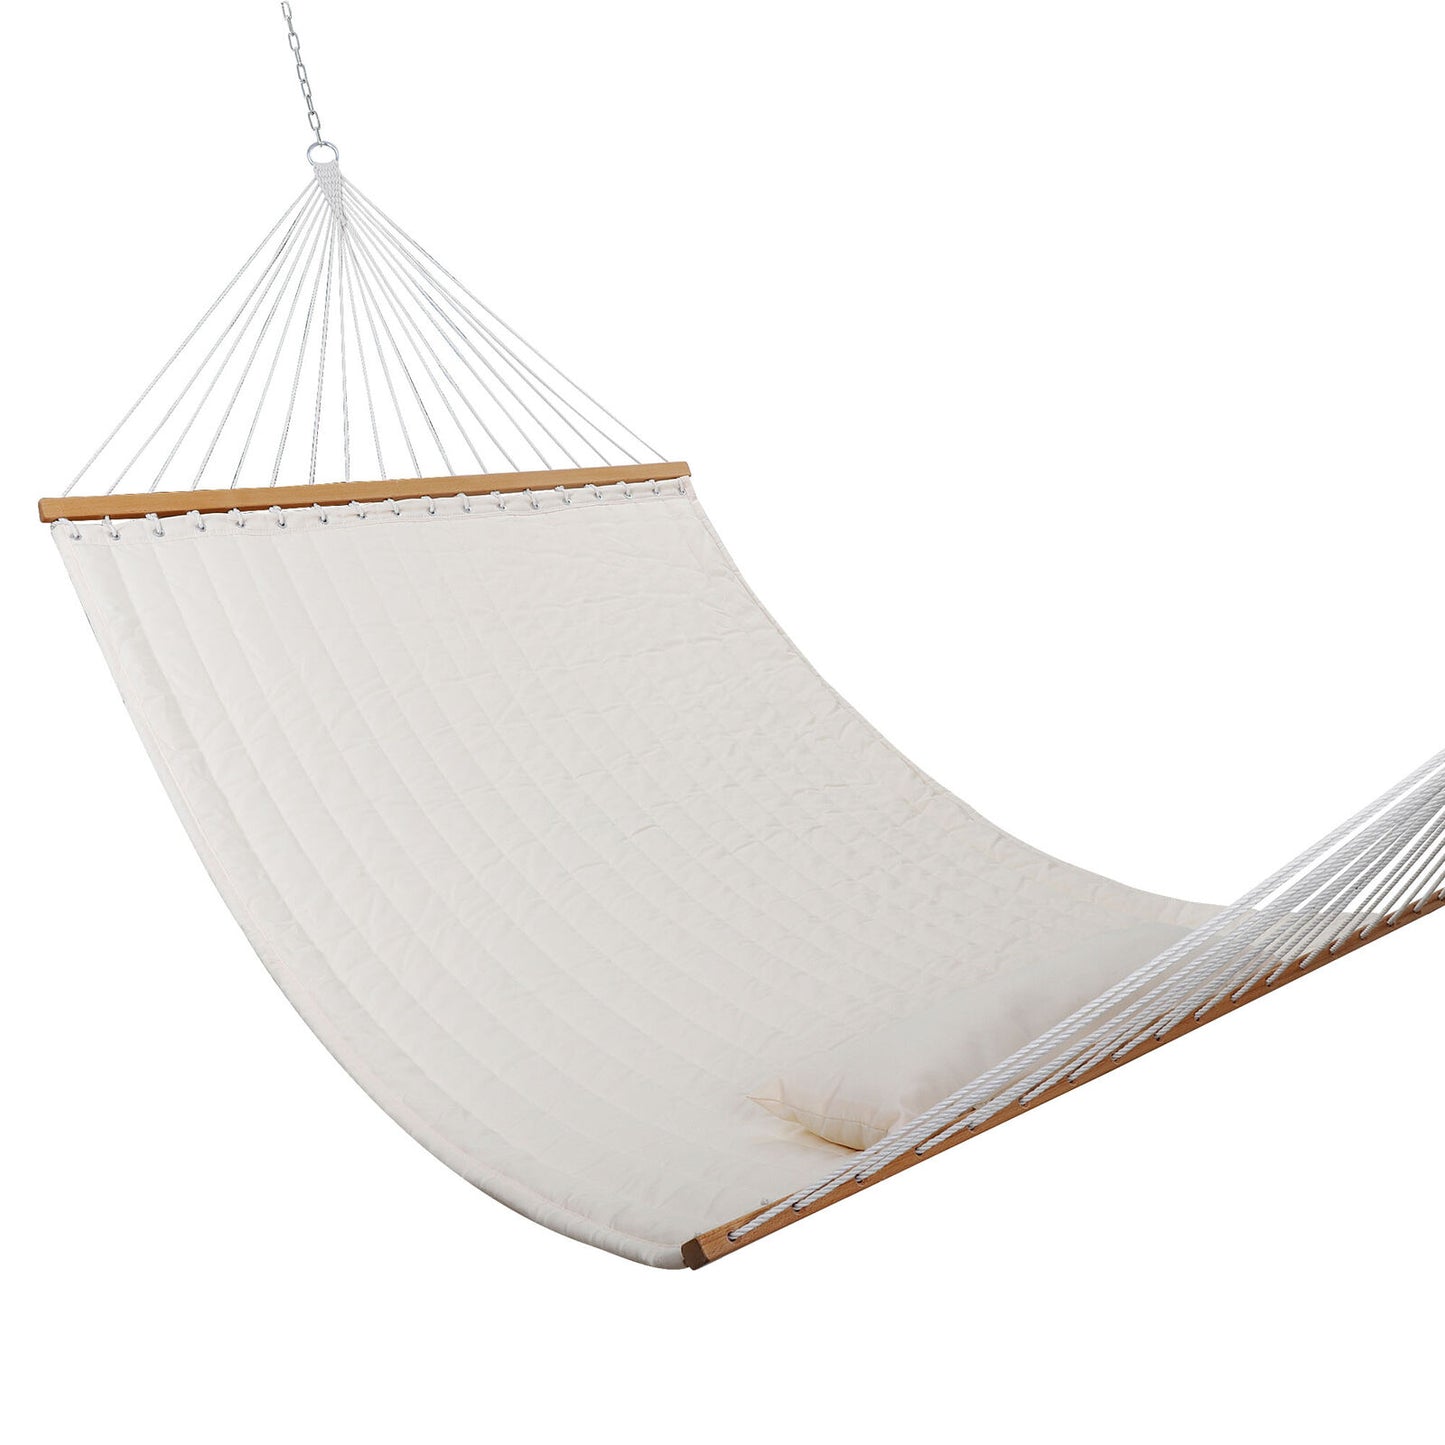 55'' Hammocks Double Quilted Fabric Swing with Pillow hammocks Natural